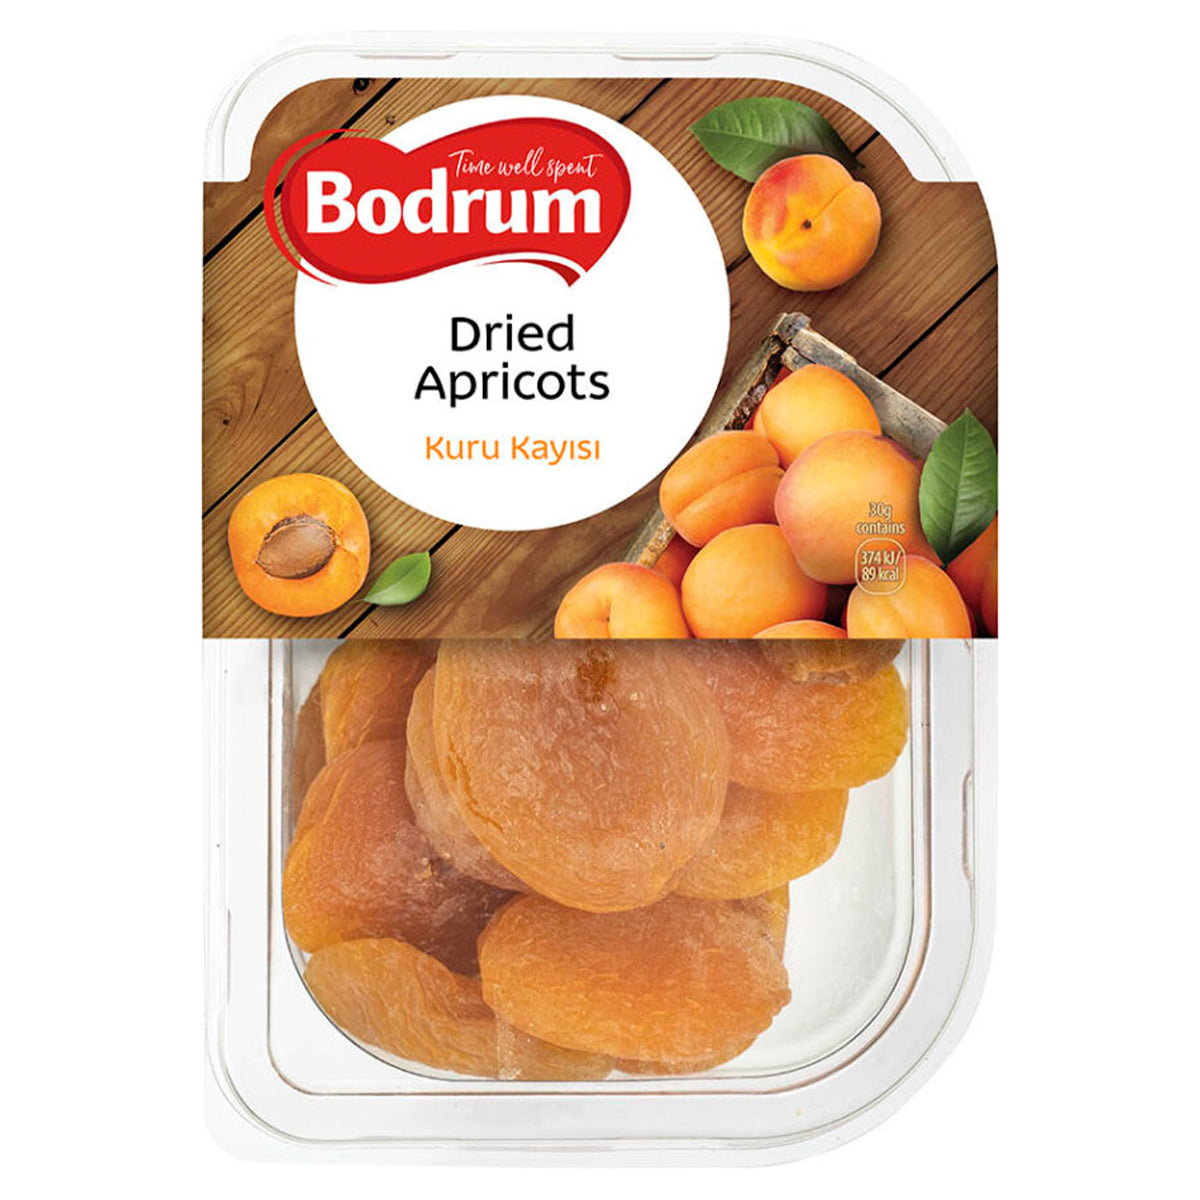 Bodrum - Dried Apricots - 200g in a plastic container.